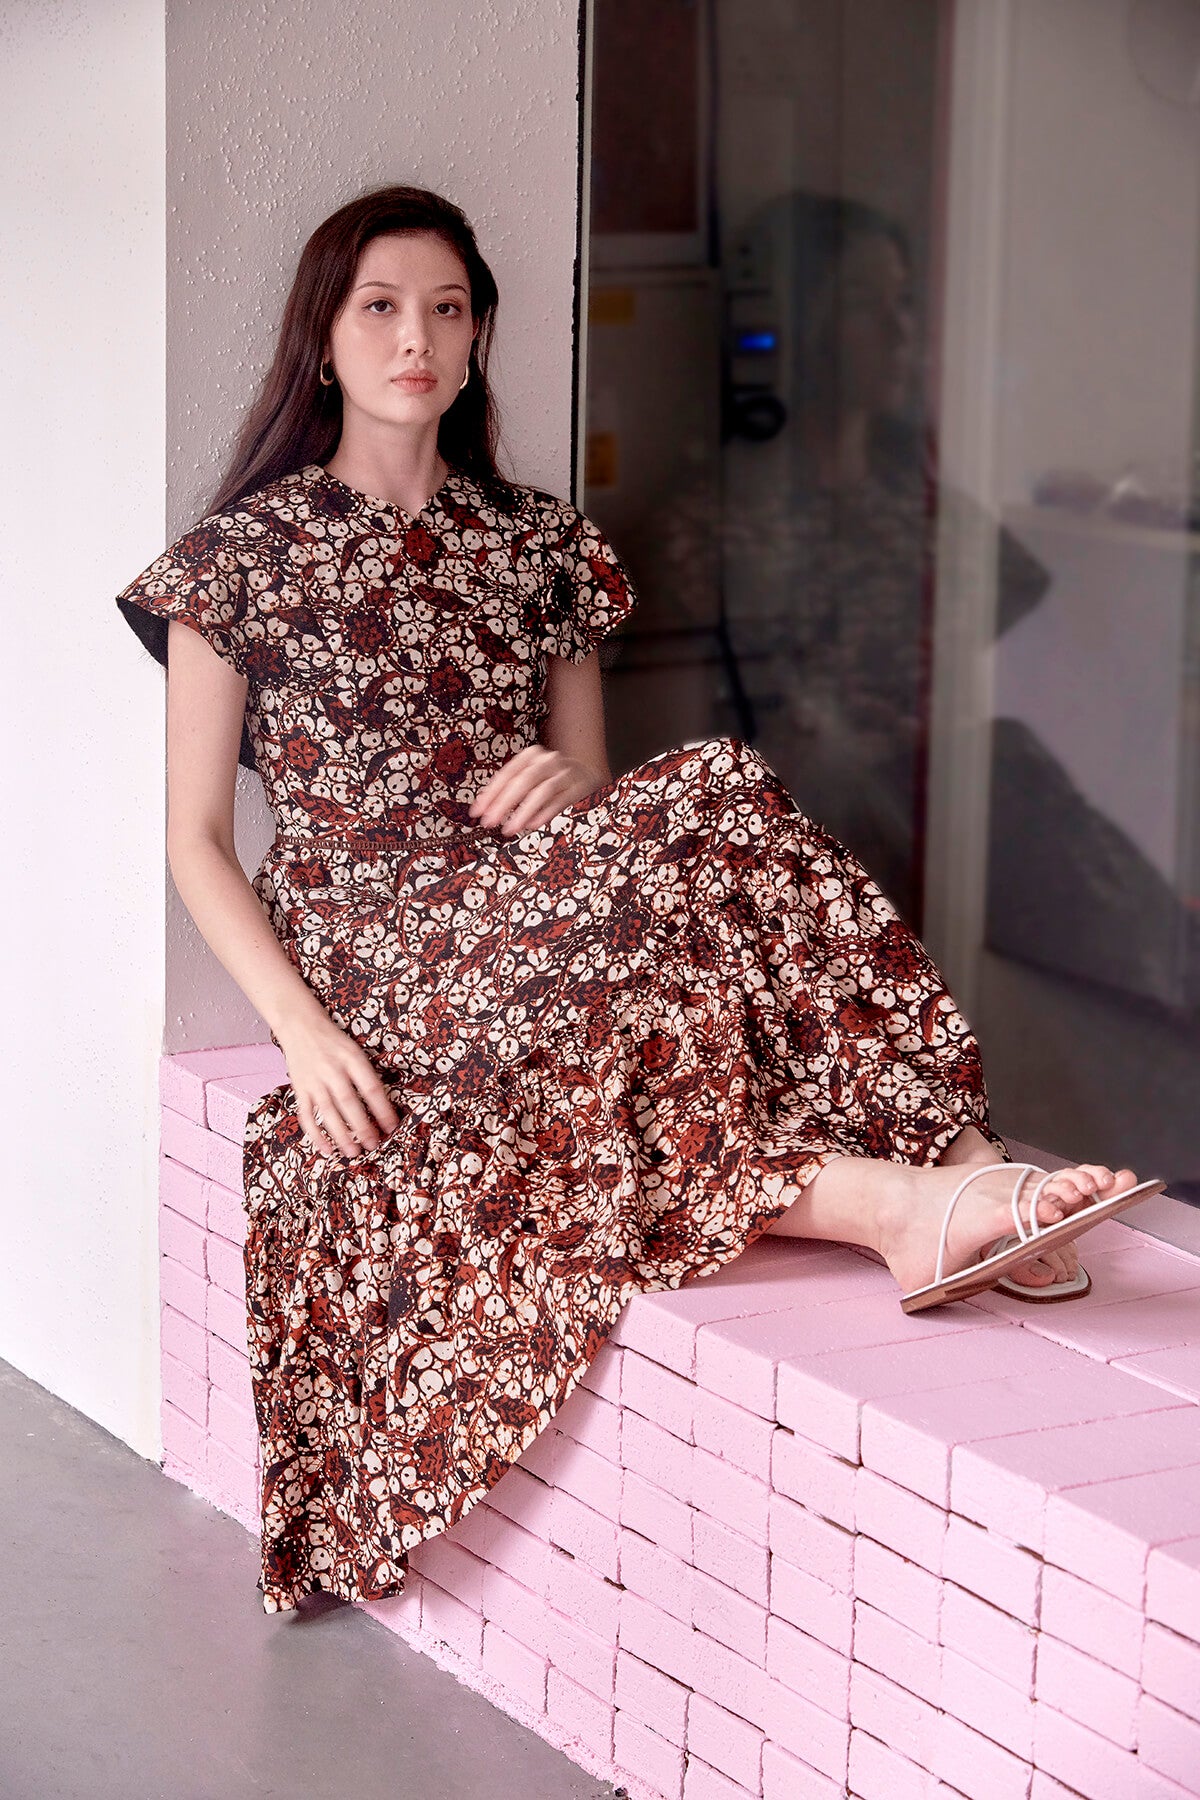 Eursian woman sitting on a pink ledge, legs stretched out and looking relax in a long brown batik dress. Dress has sleeves like a cap and a long tiered skirt.